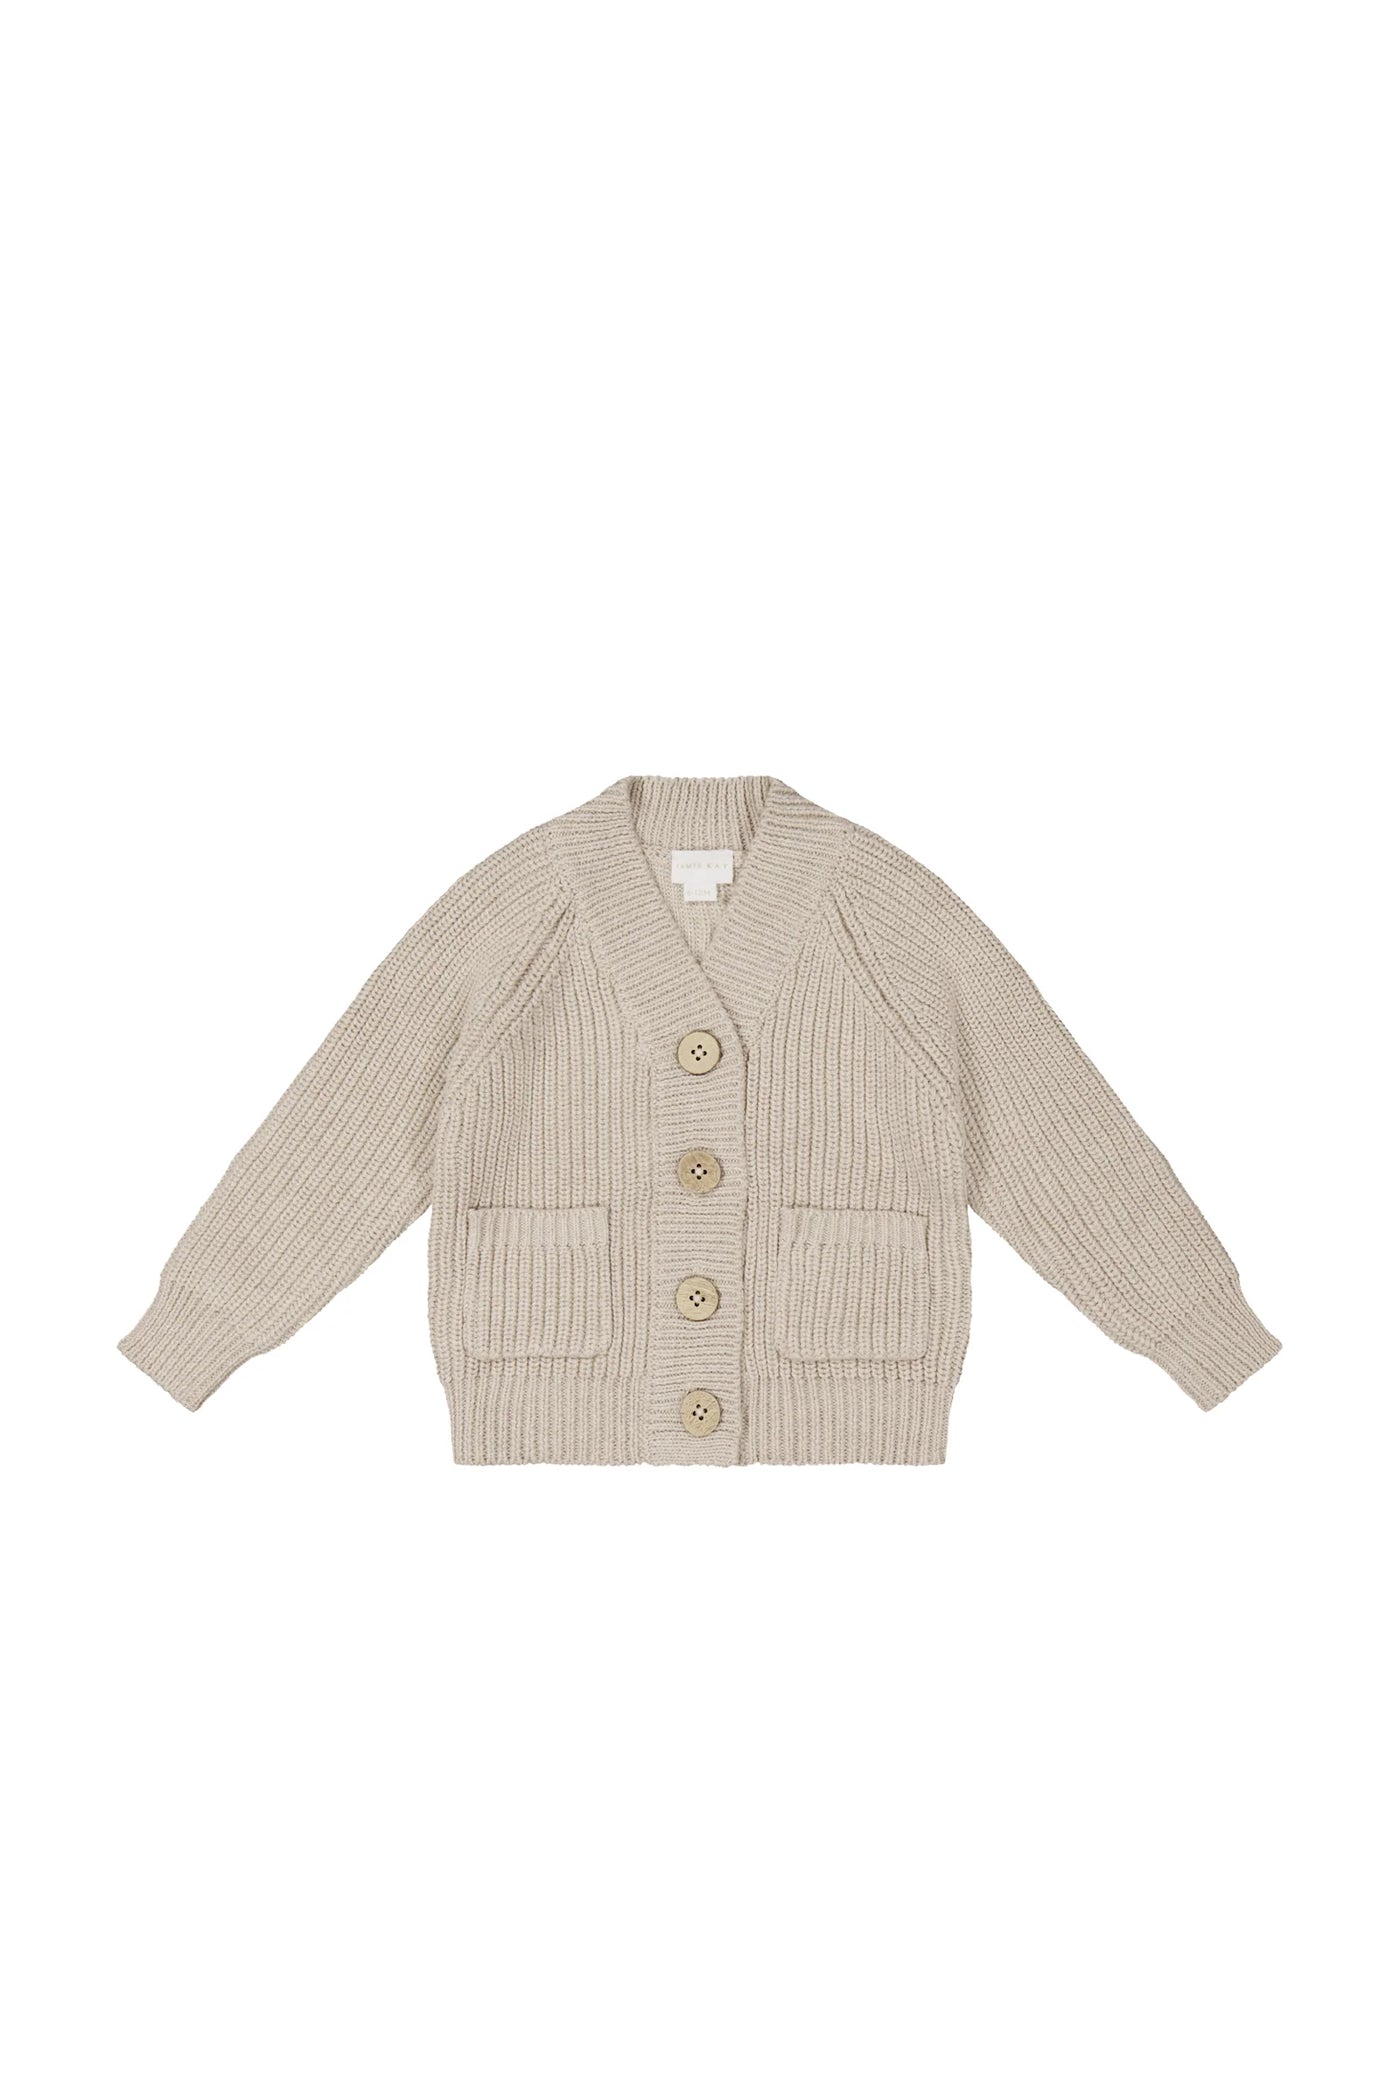 ARTY KNITTED CARDIGAN - OAT MARLE